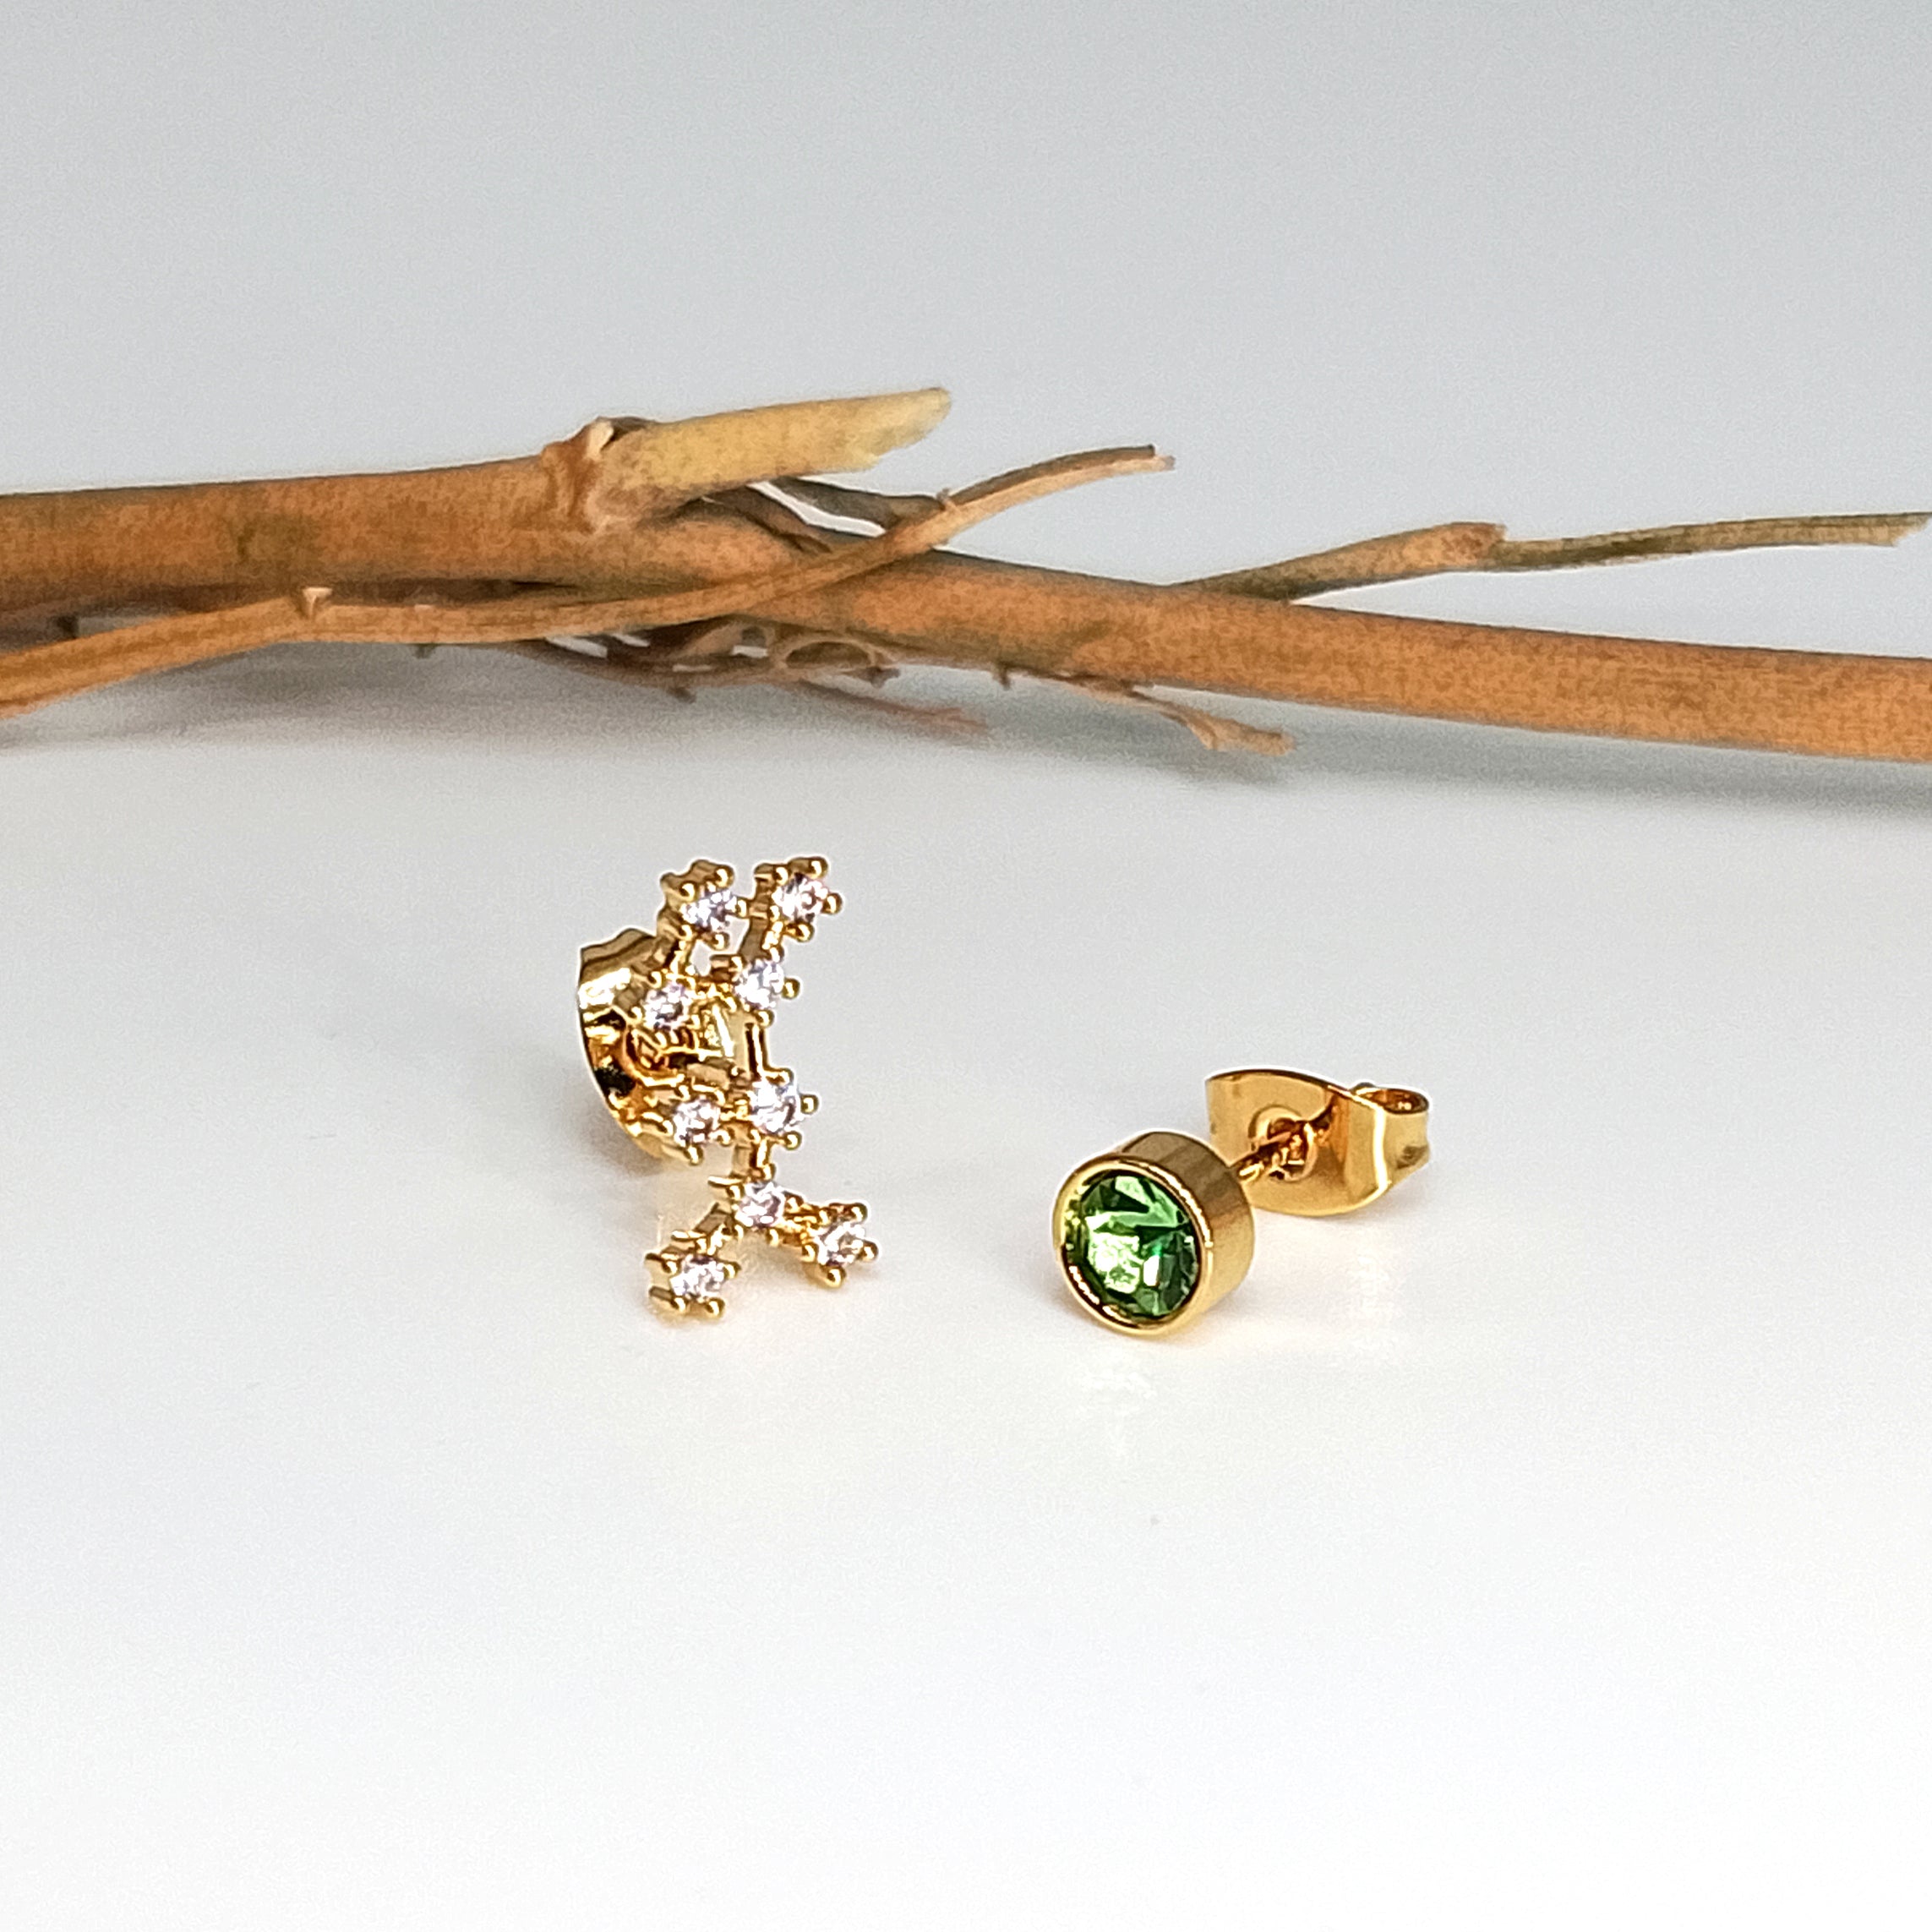 Virgo Constellation Earrings - 24K Gold Plated with Aventurine